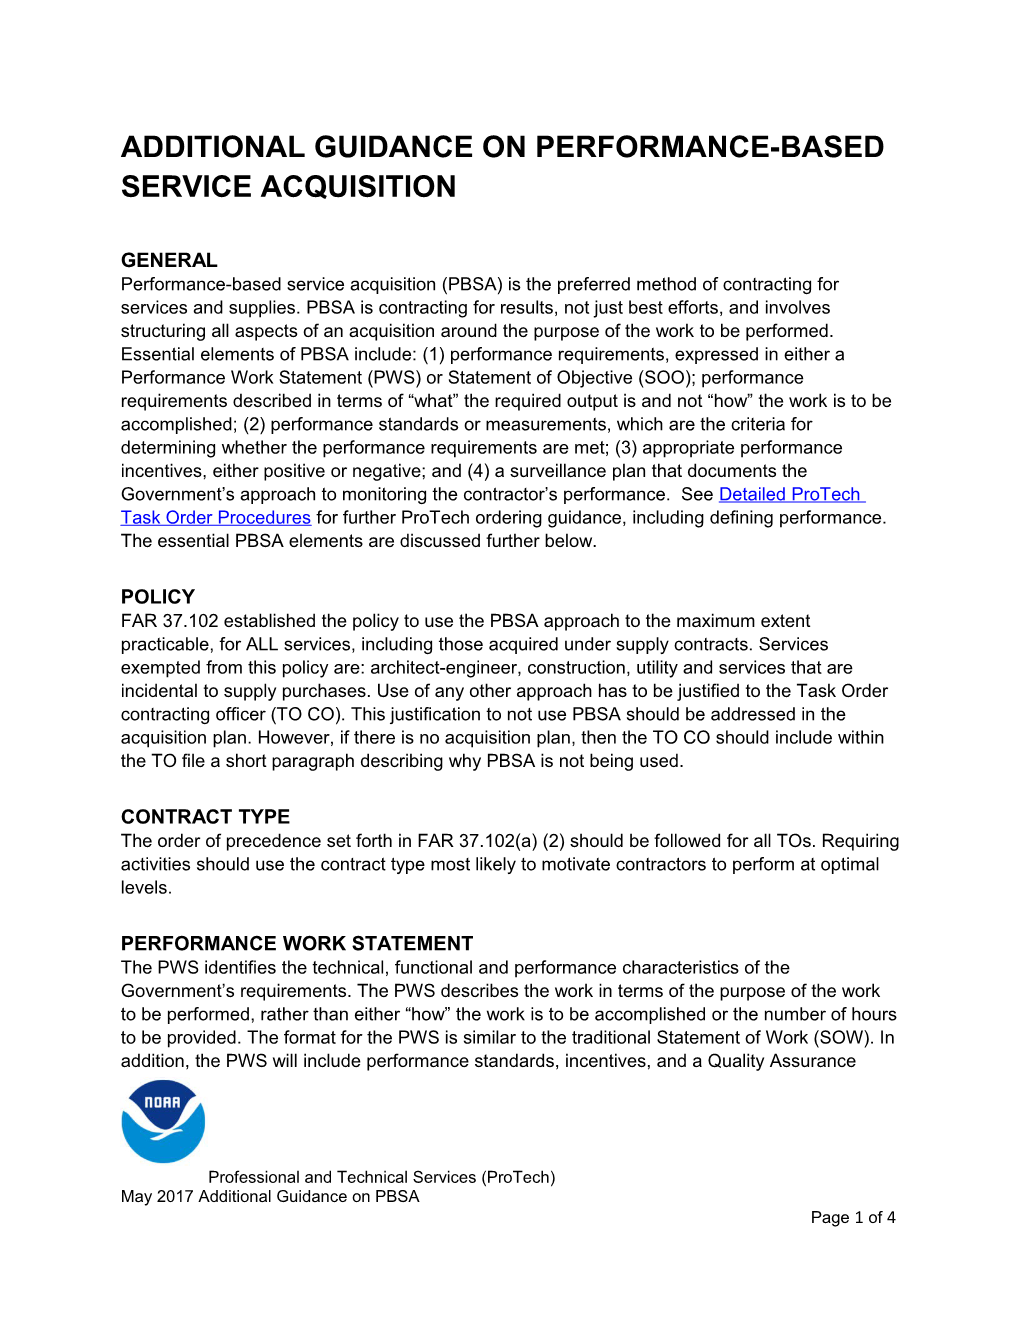 Additional Guidance on Performance-Based Service Acquisition